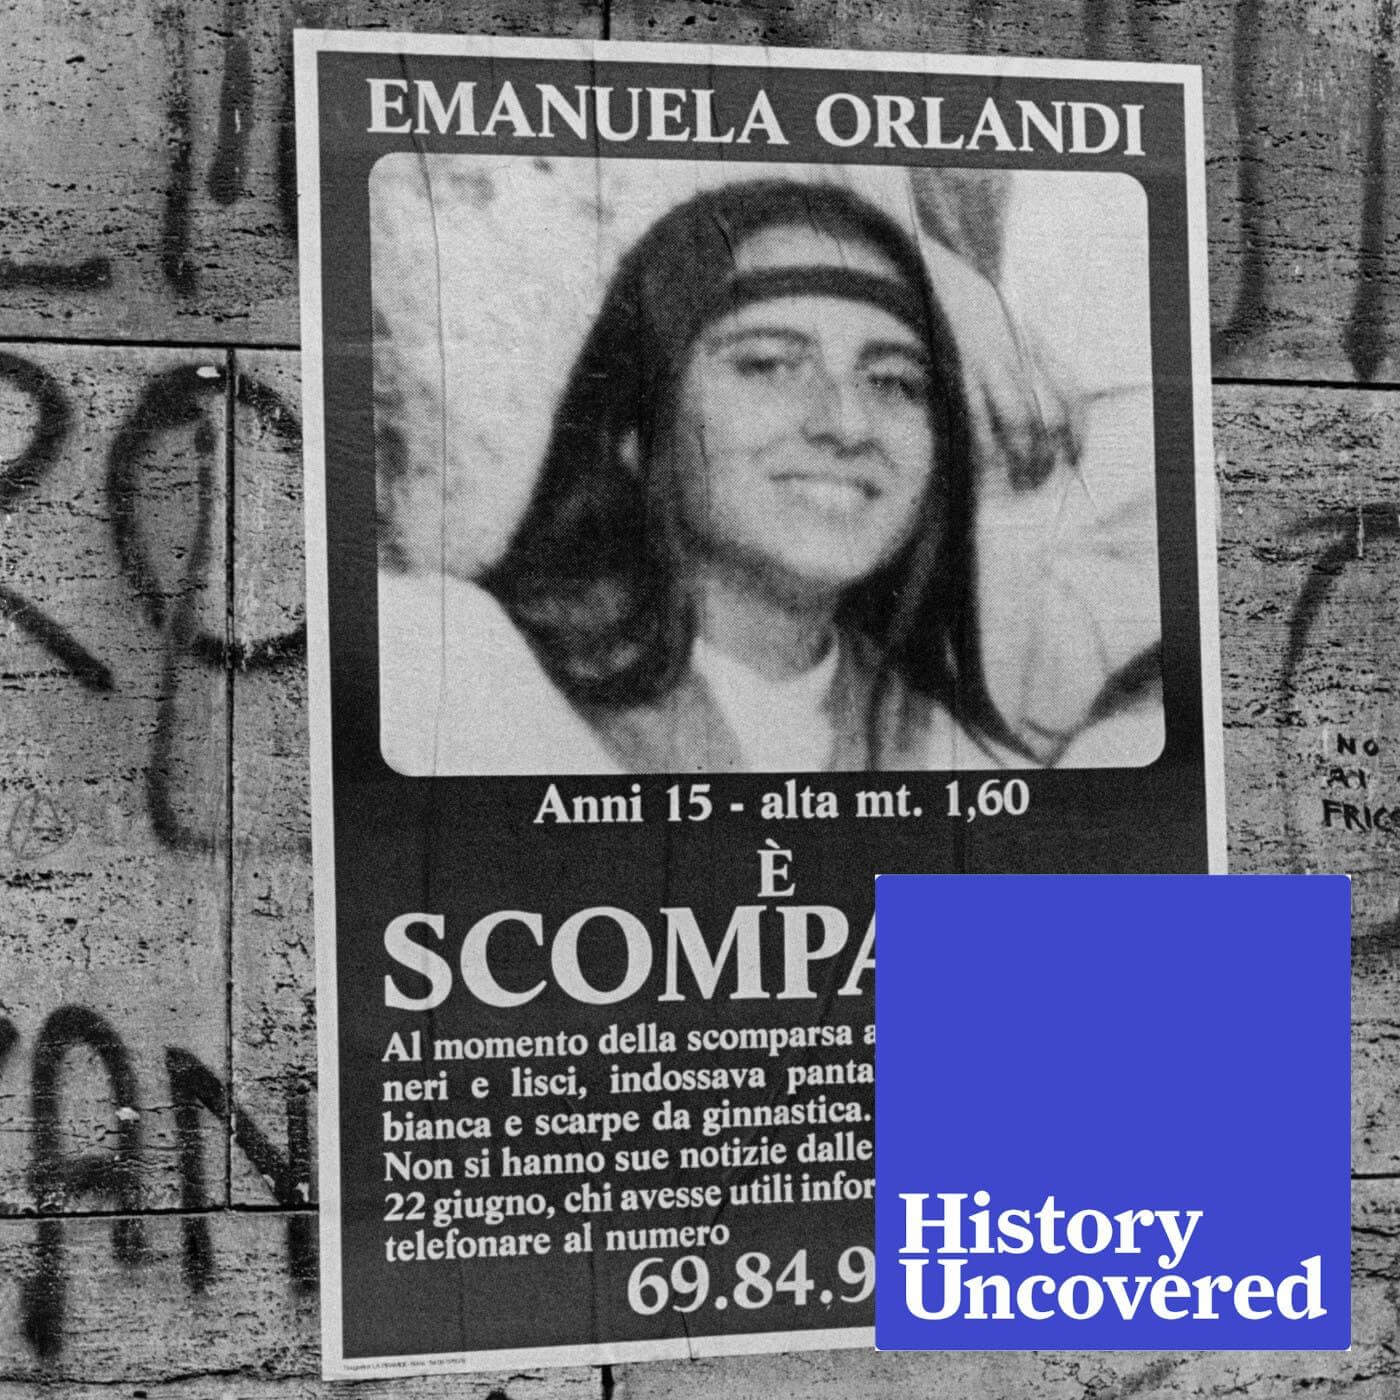 The Disappearance Of 15-Year-Old Emanuela Orlandi